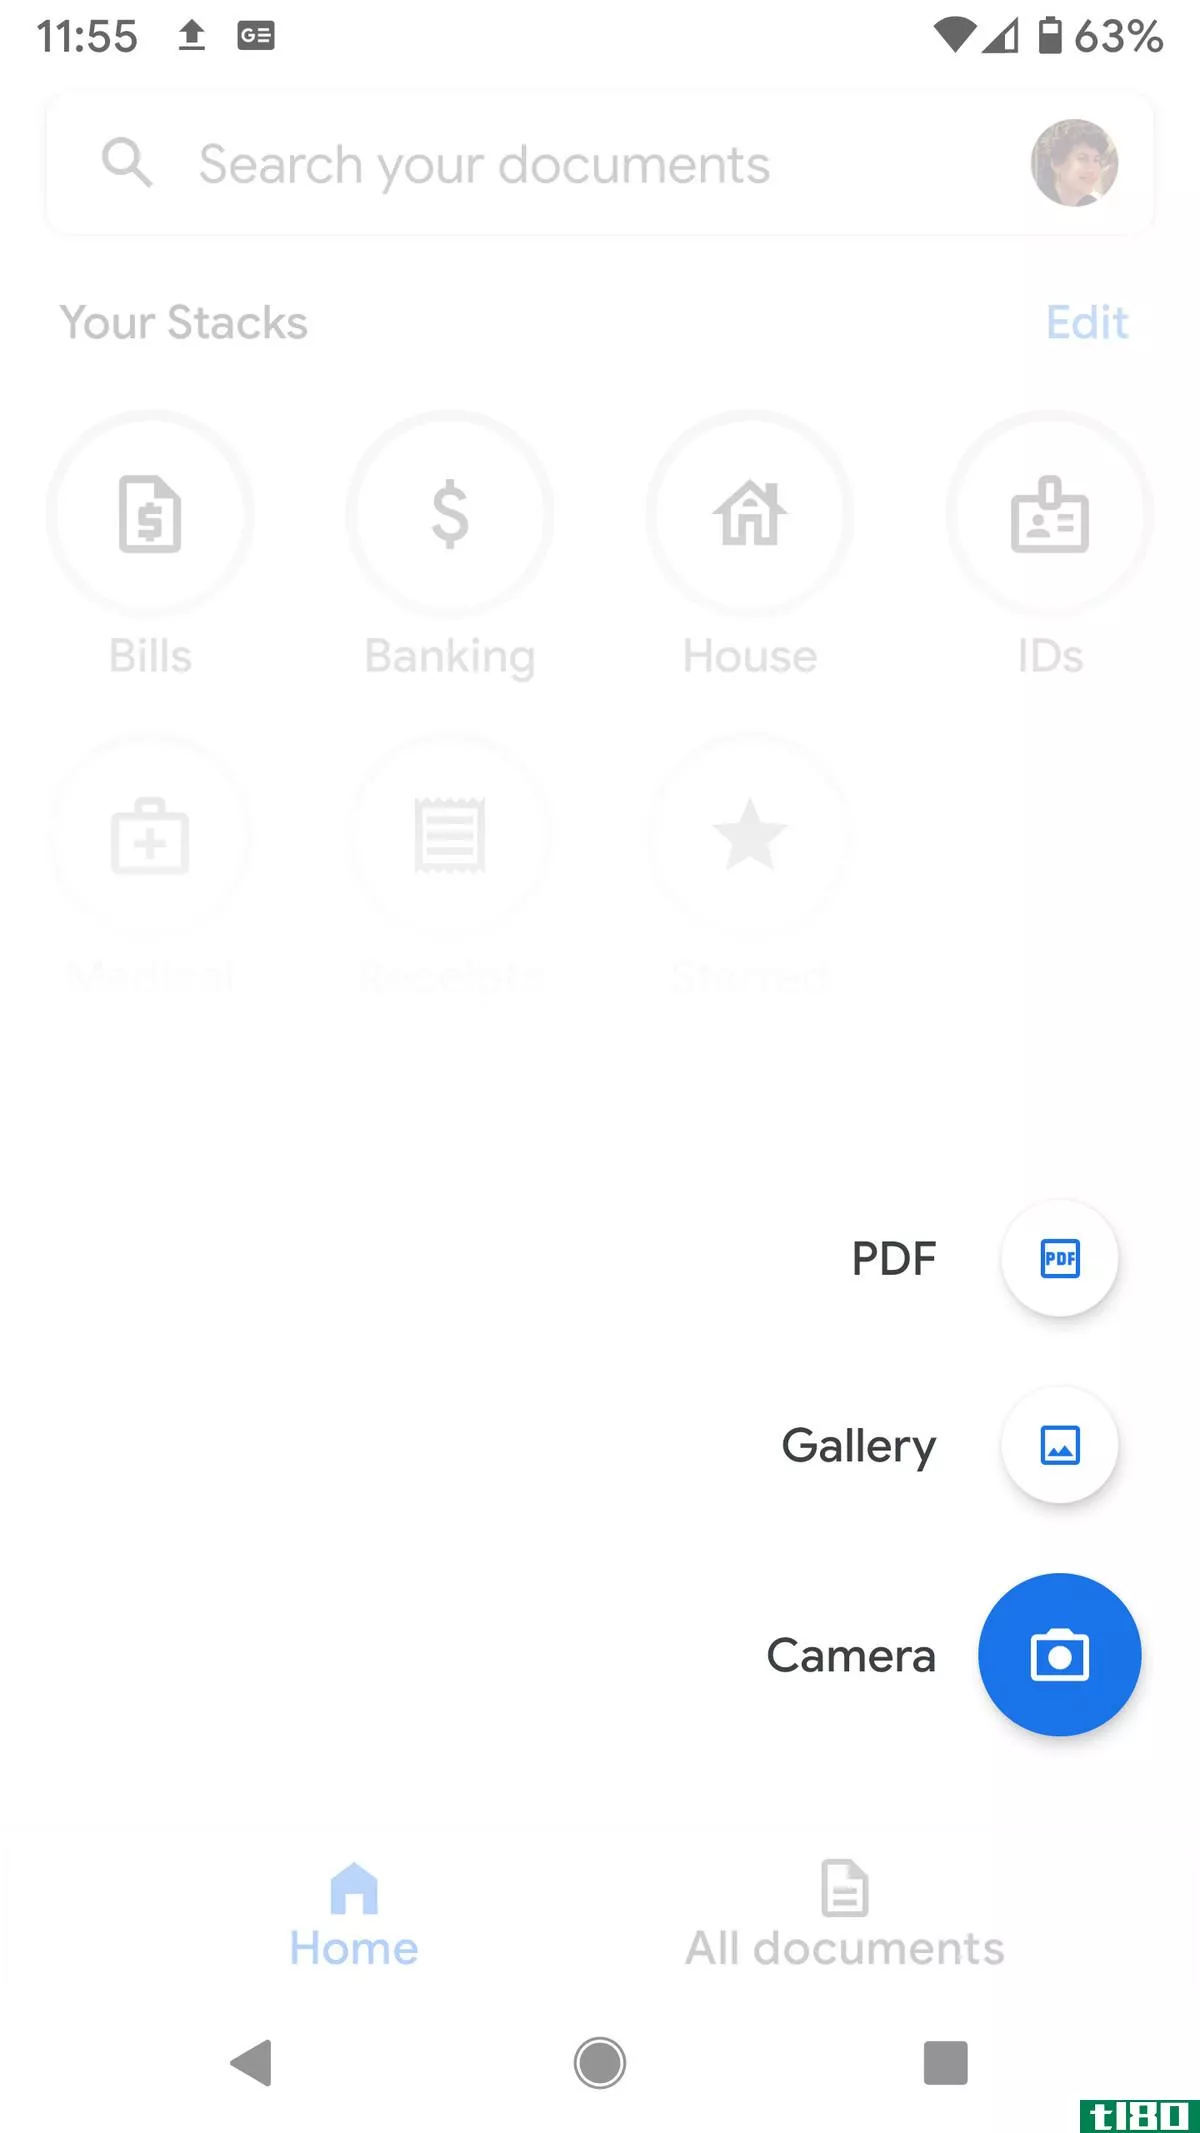 You can add an existing PDF or scan one using your phone’s camera.